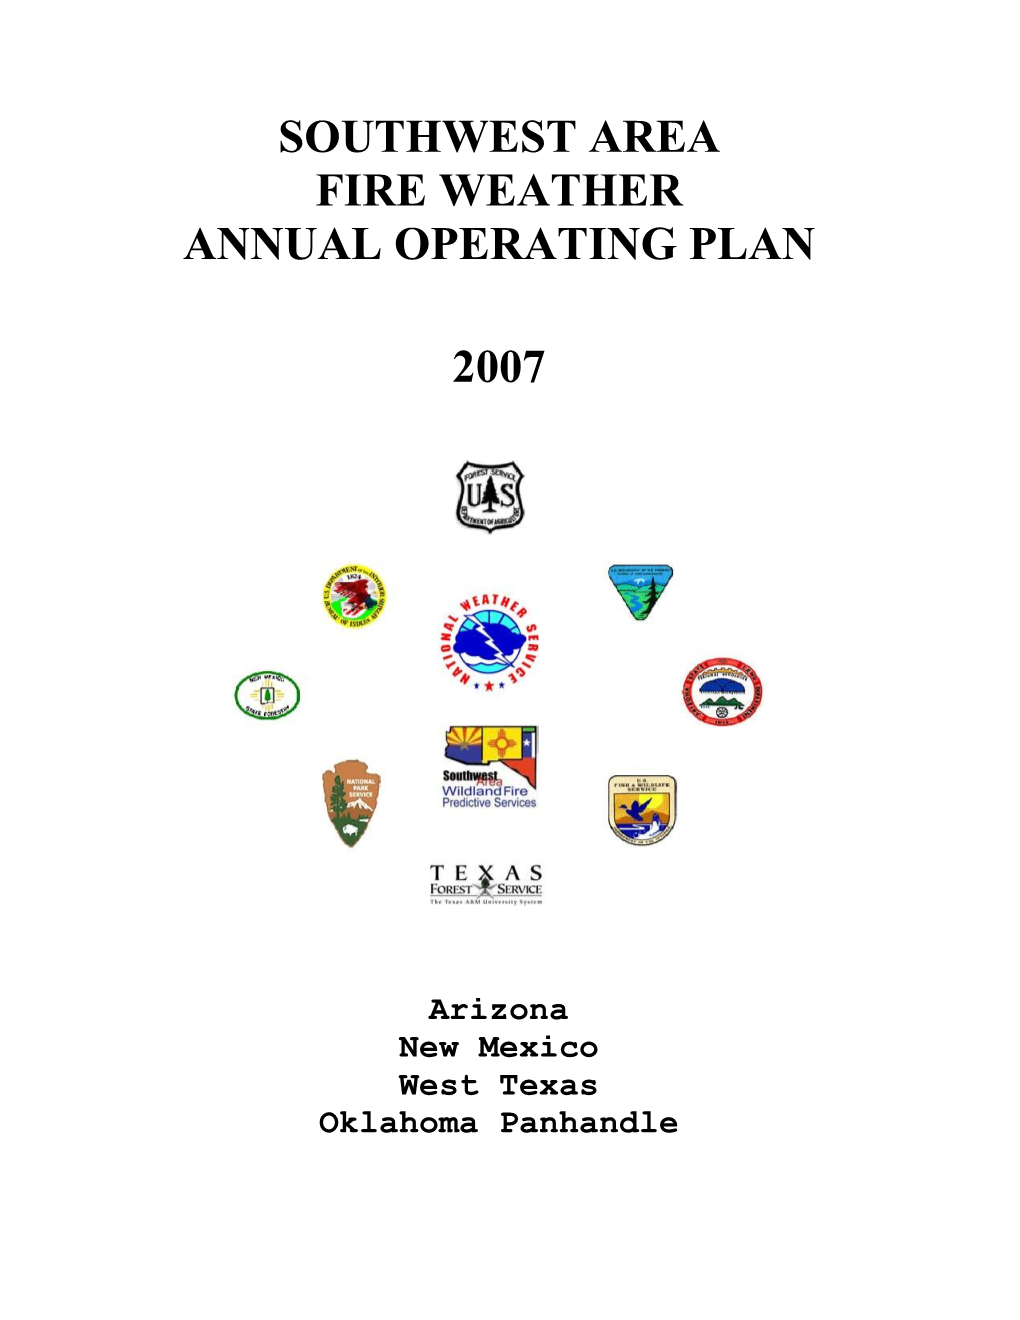 Southwest Area Fire Weather Annual Operating Plan 2007